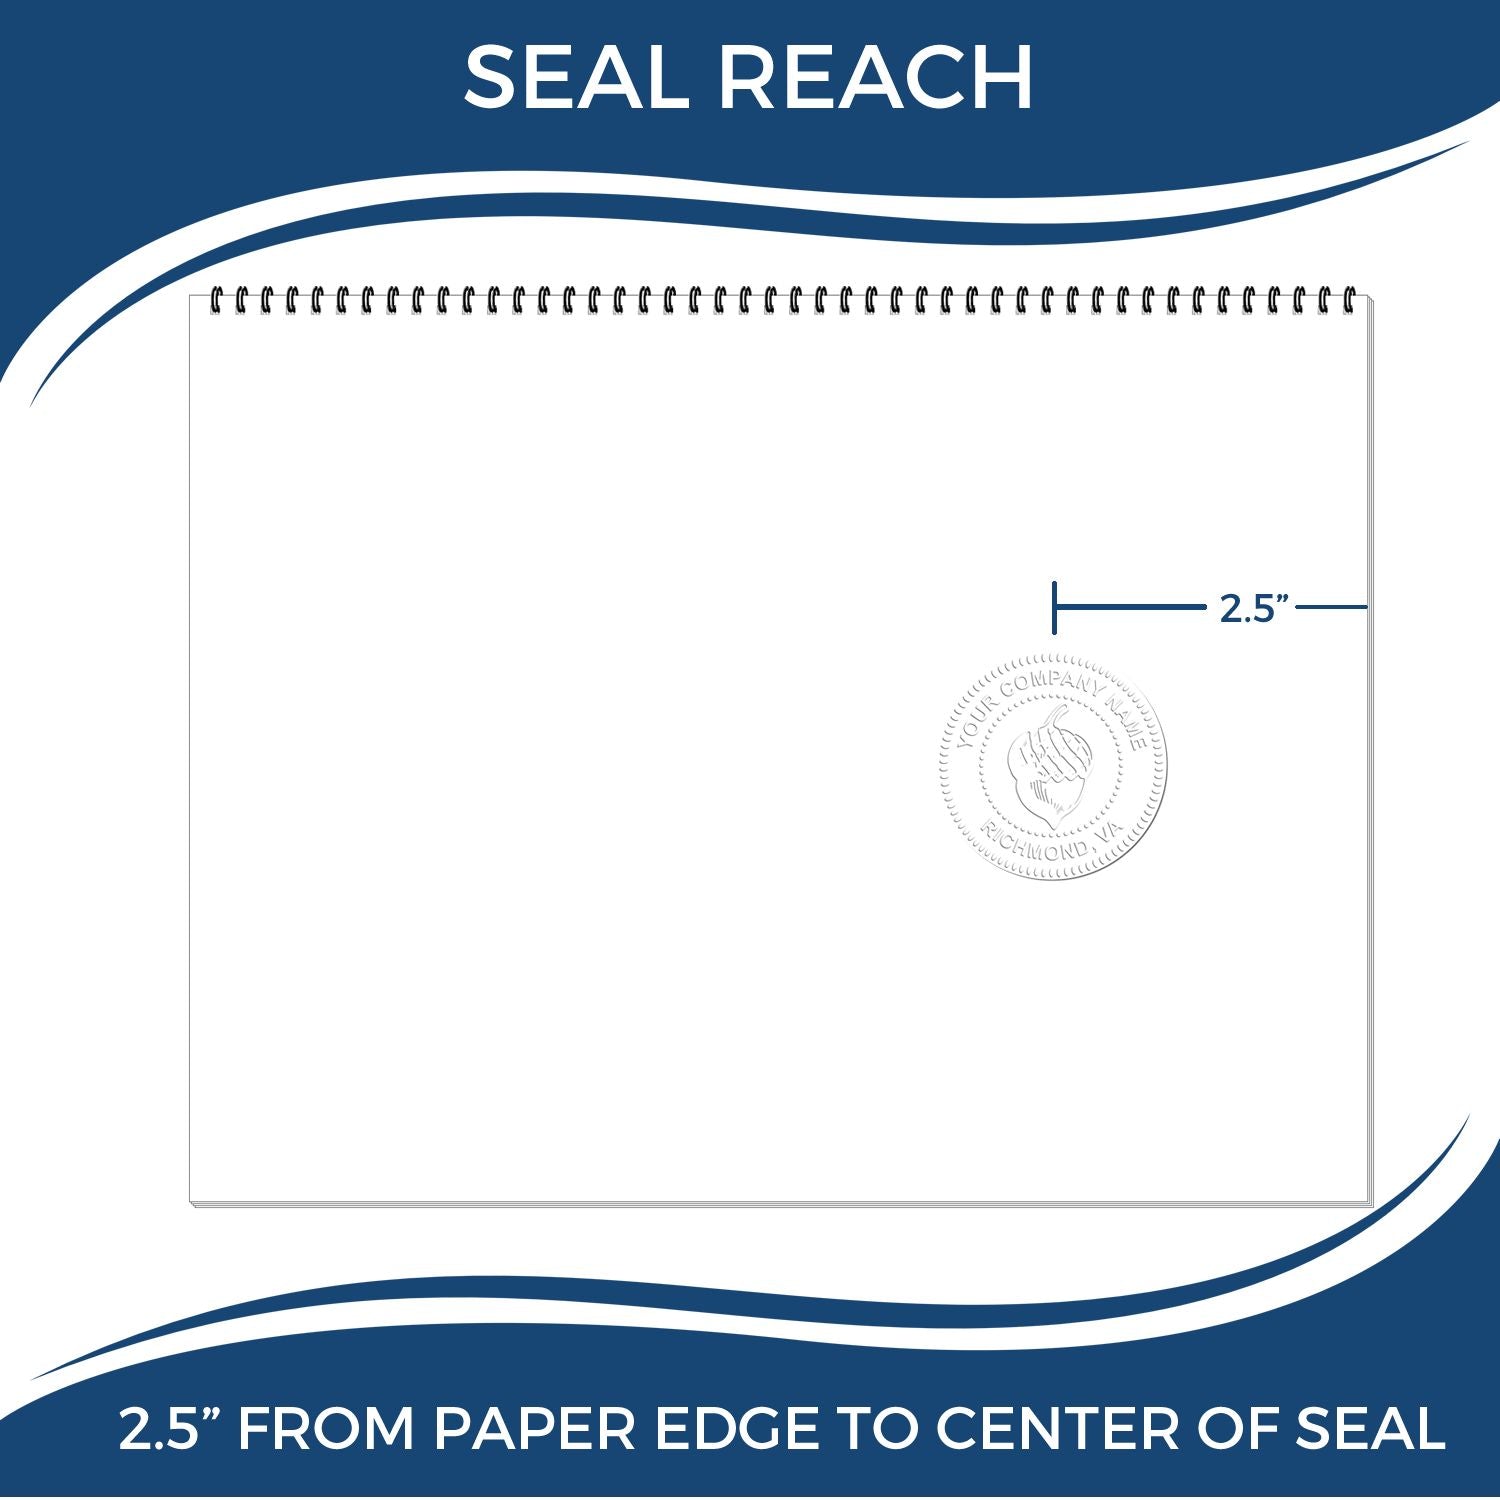 An infographic showing the seal reach which is represented by a ruler and a miniature seal image of the Long Reach Idaho PE Seal